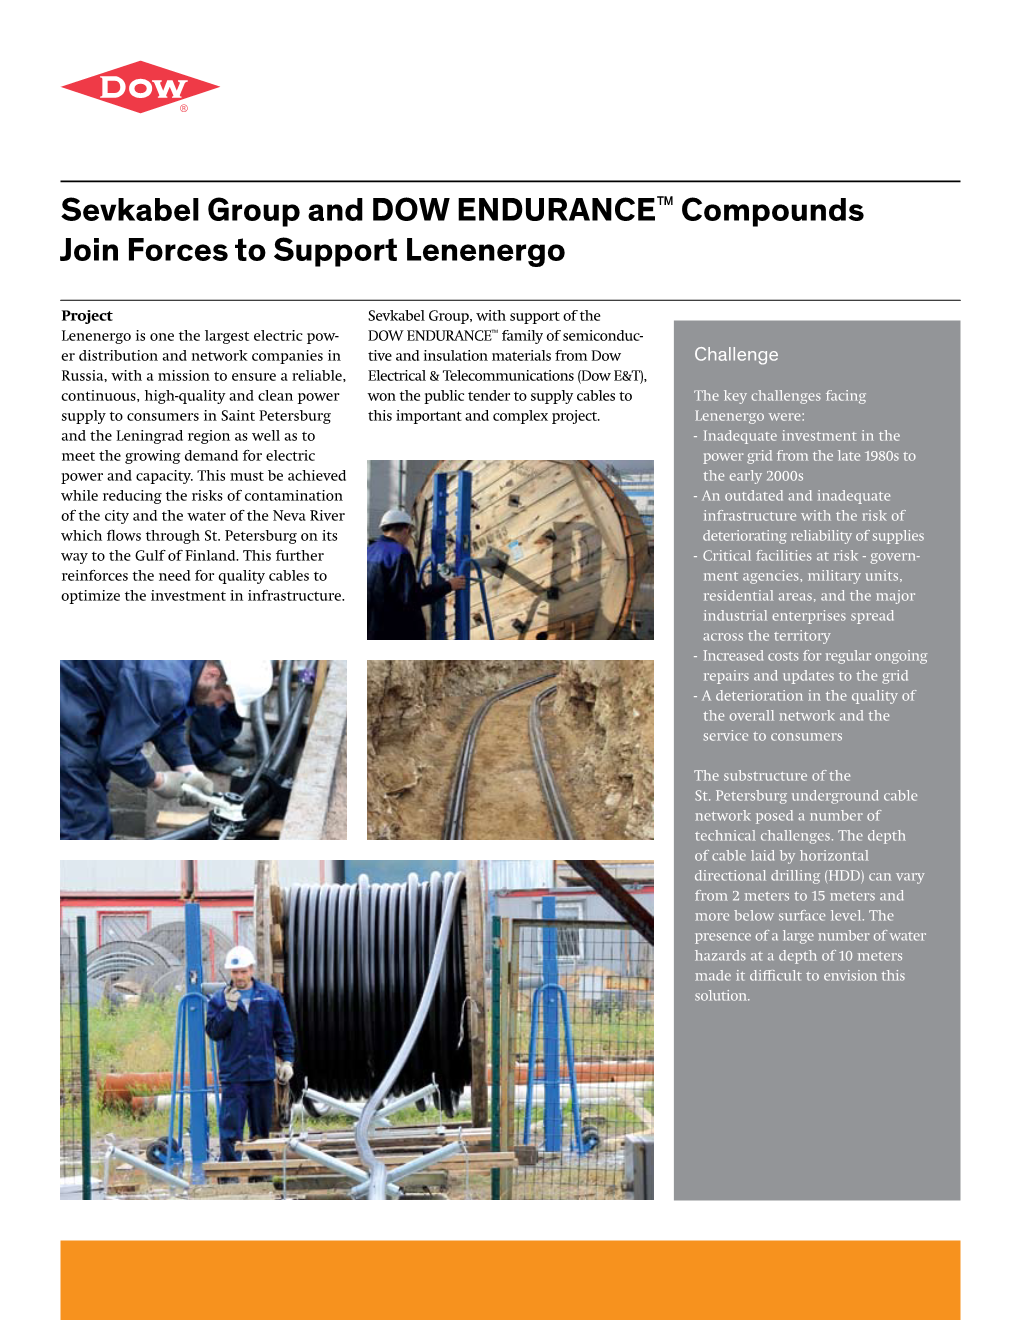 Sevkabel Group and DOW ENDURANCE™ Compounds Join Forces to Support Lenenergo